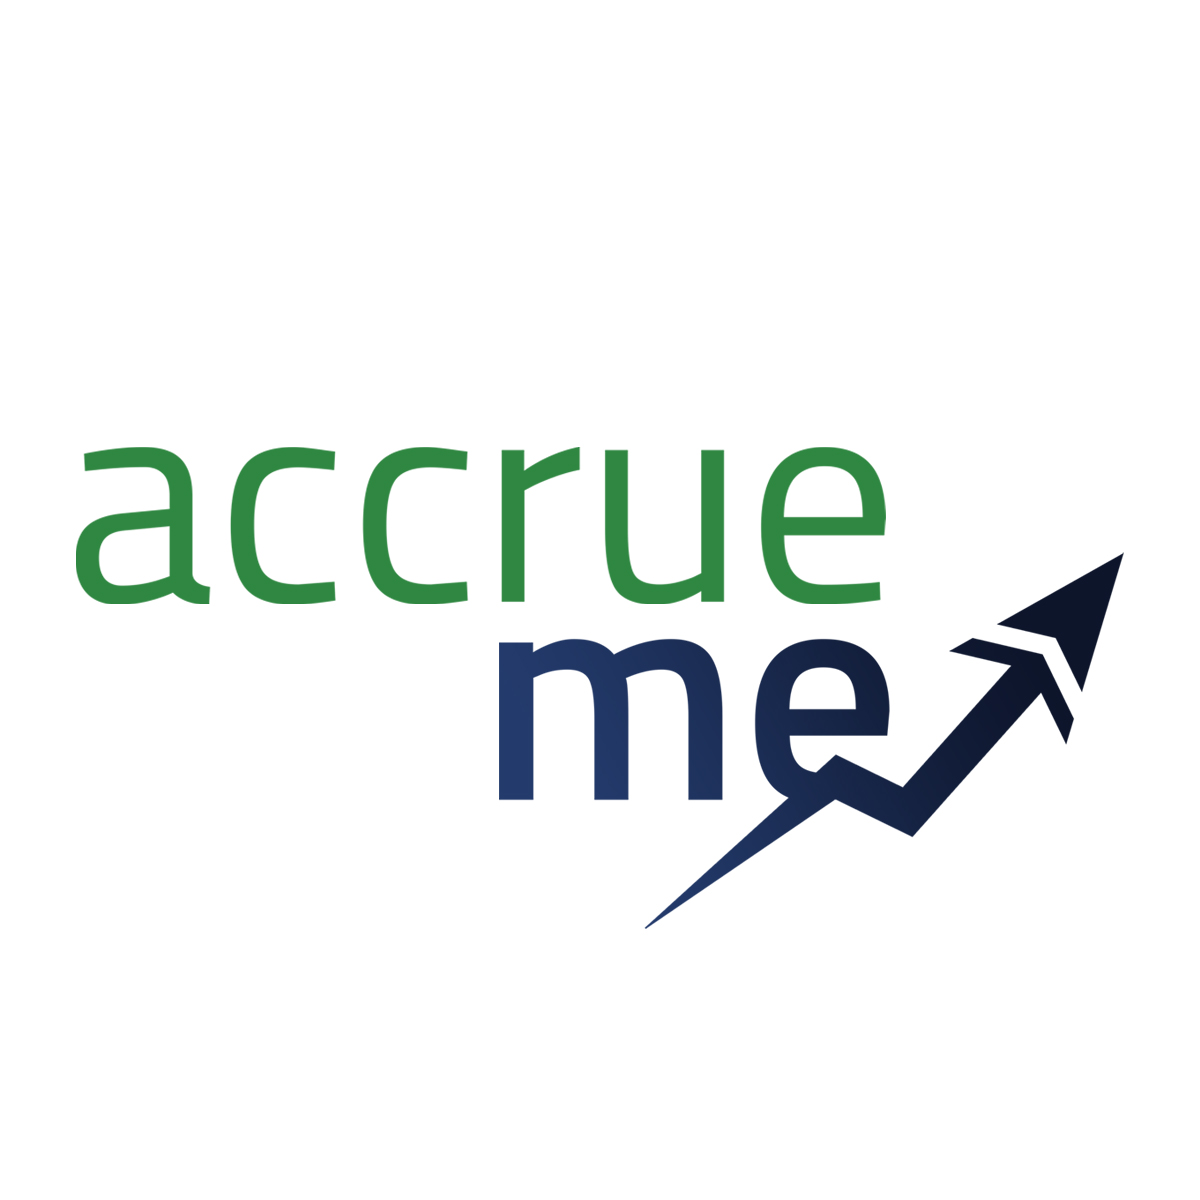 Having trouble funding growth and managing cash flow for your FBA business? AccrueMe has you covered with $20k-$1M in capital! Complete their 3-minute no-risk app to see how much funding you qualify for. Say eComEngine sent you for a 30-day free trial. hubs.la/Q01zXp880